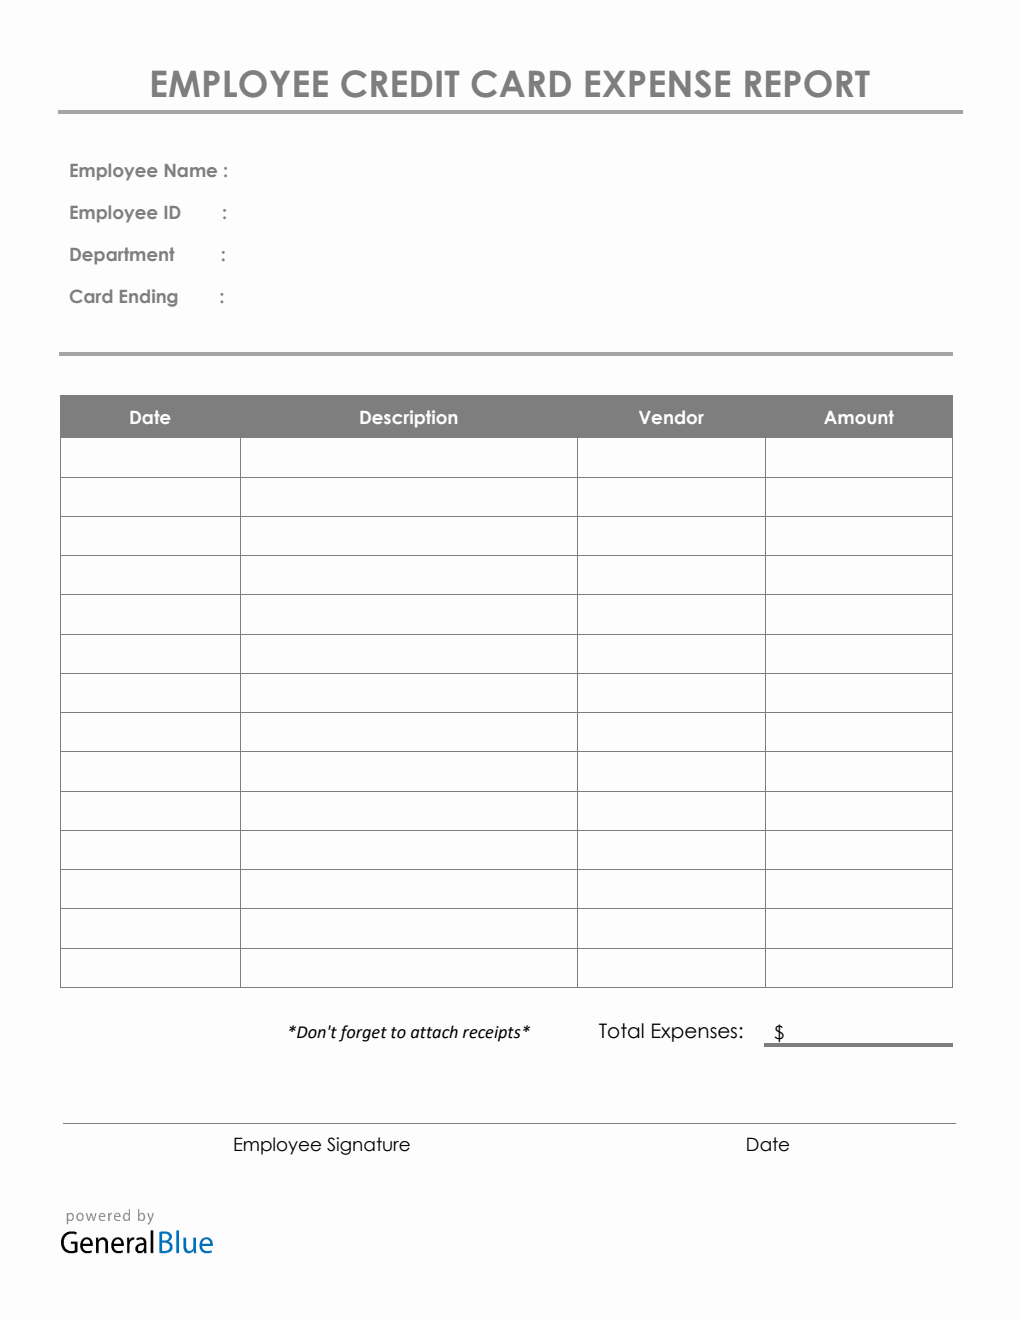 Employee Credit Card Expense Report Template in PDF